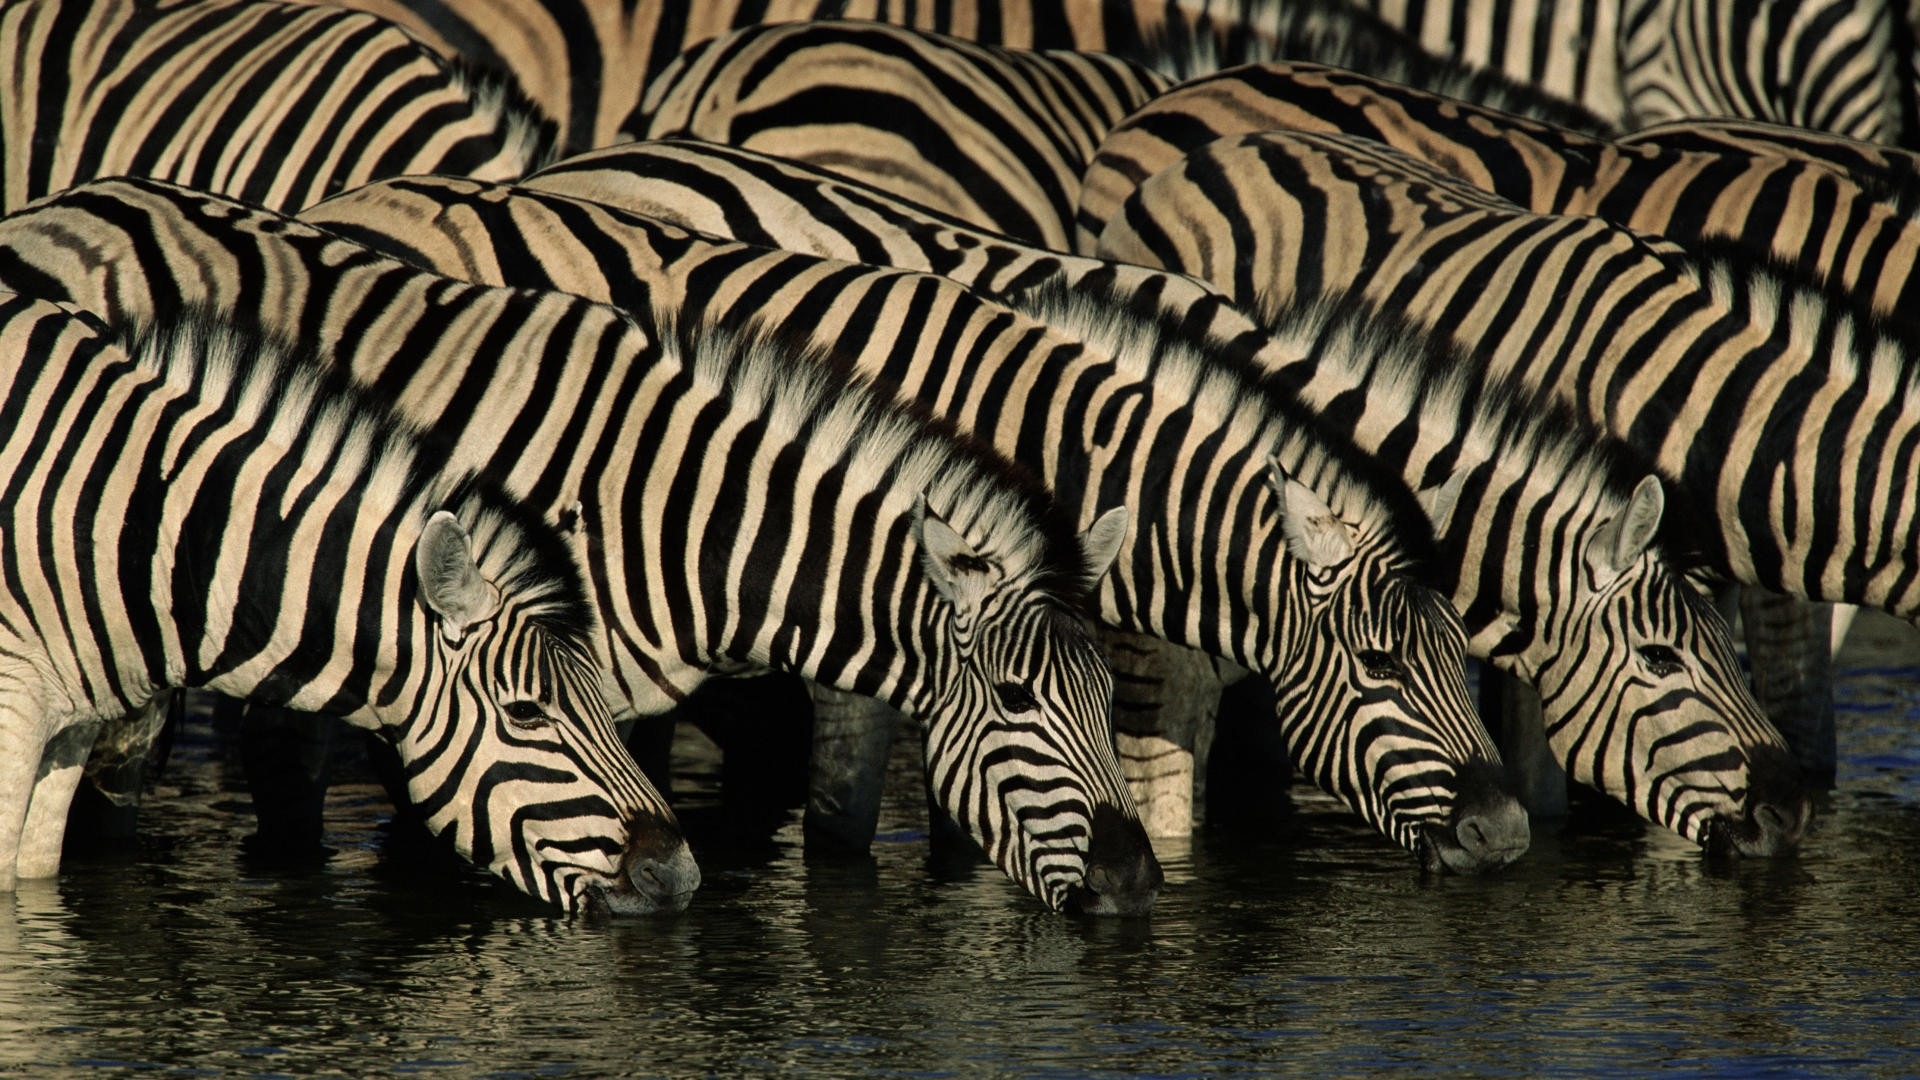 Black and white striped animal, zebra HD wallpapers #11 - 1920x1080